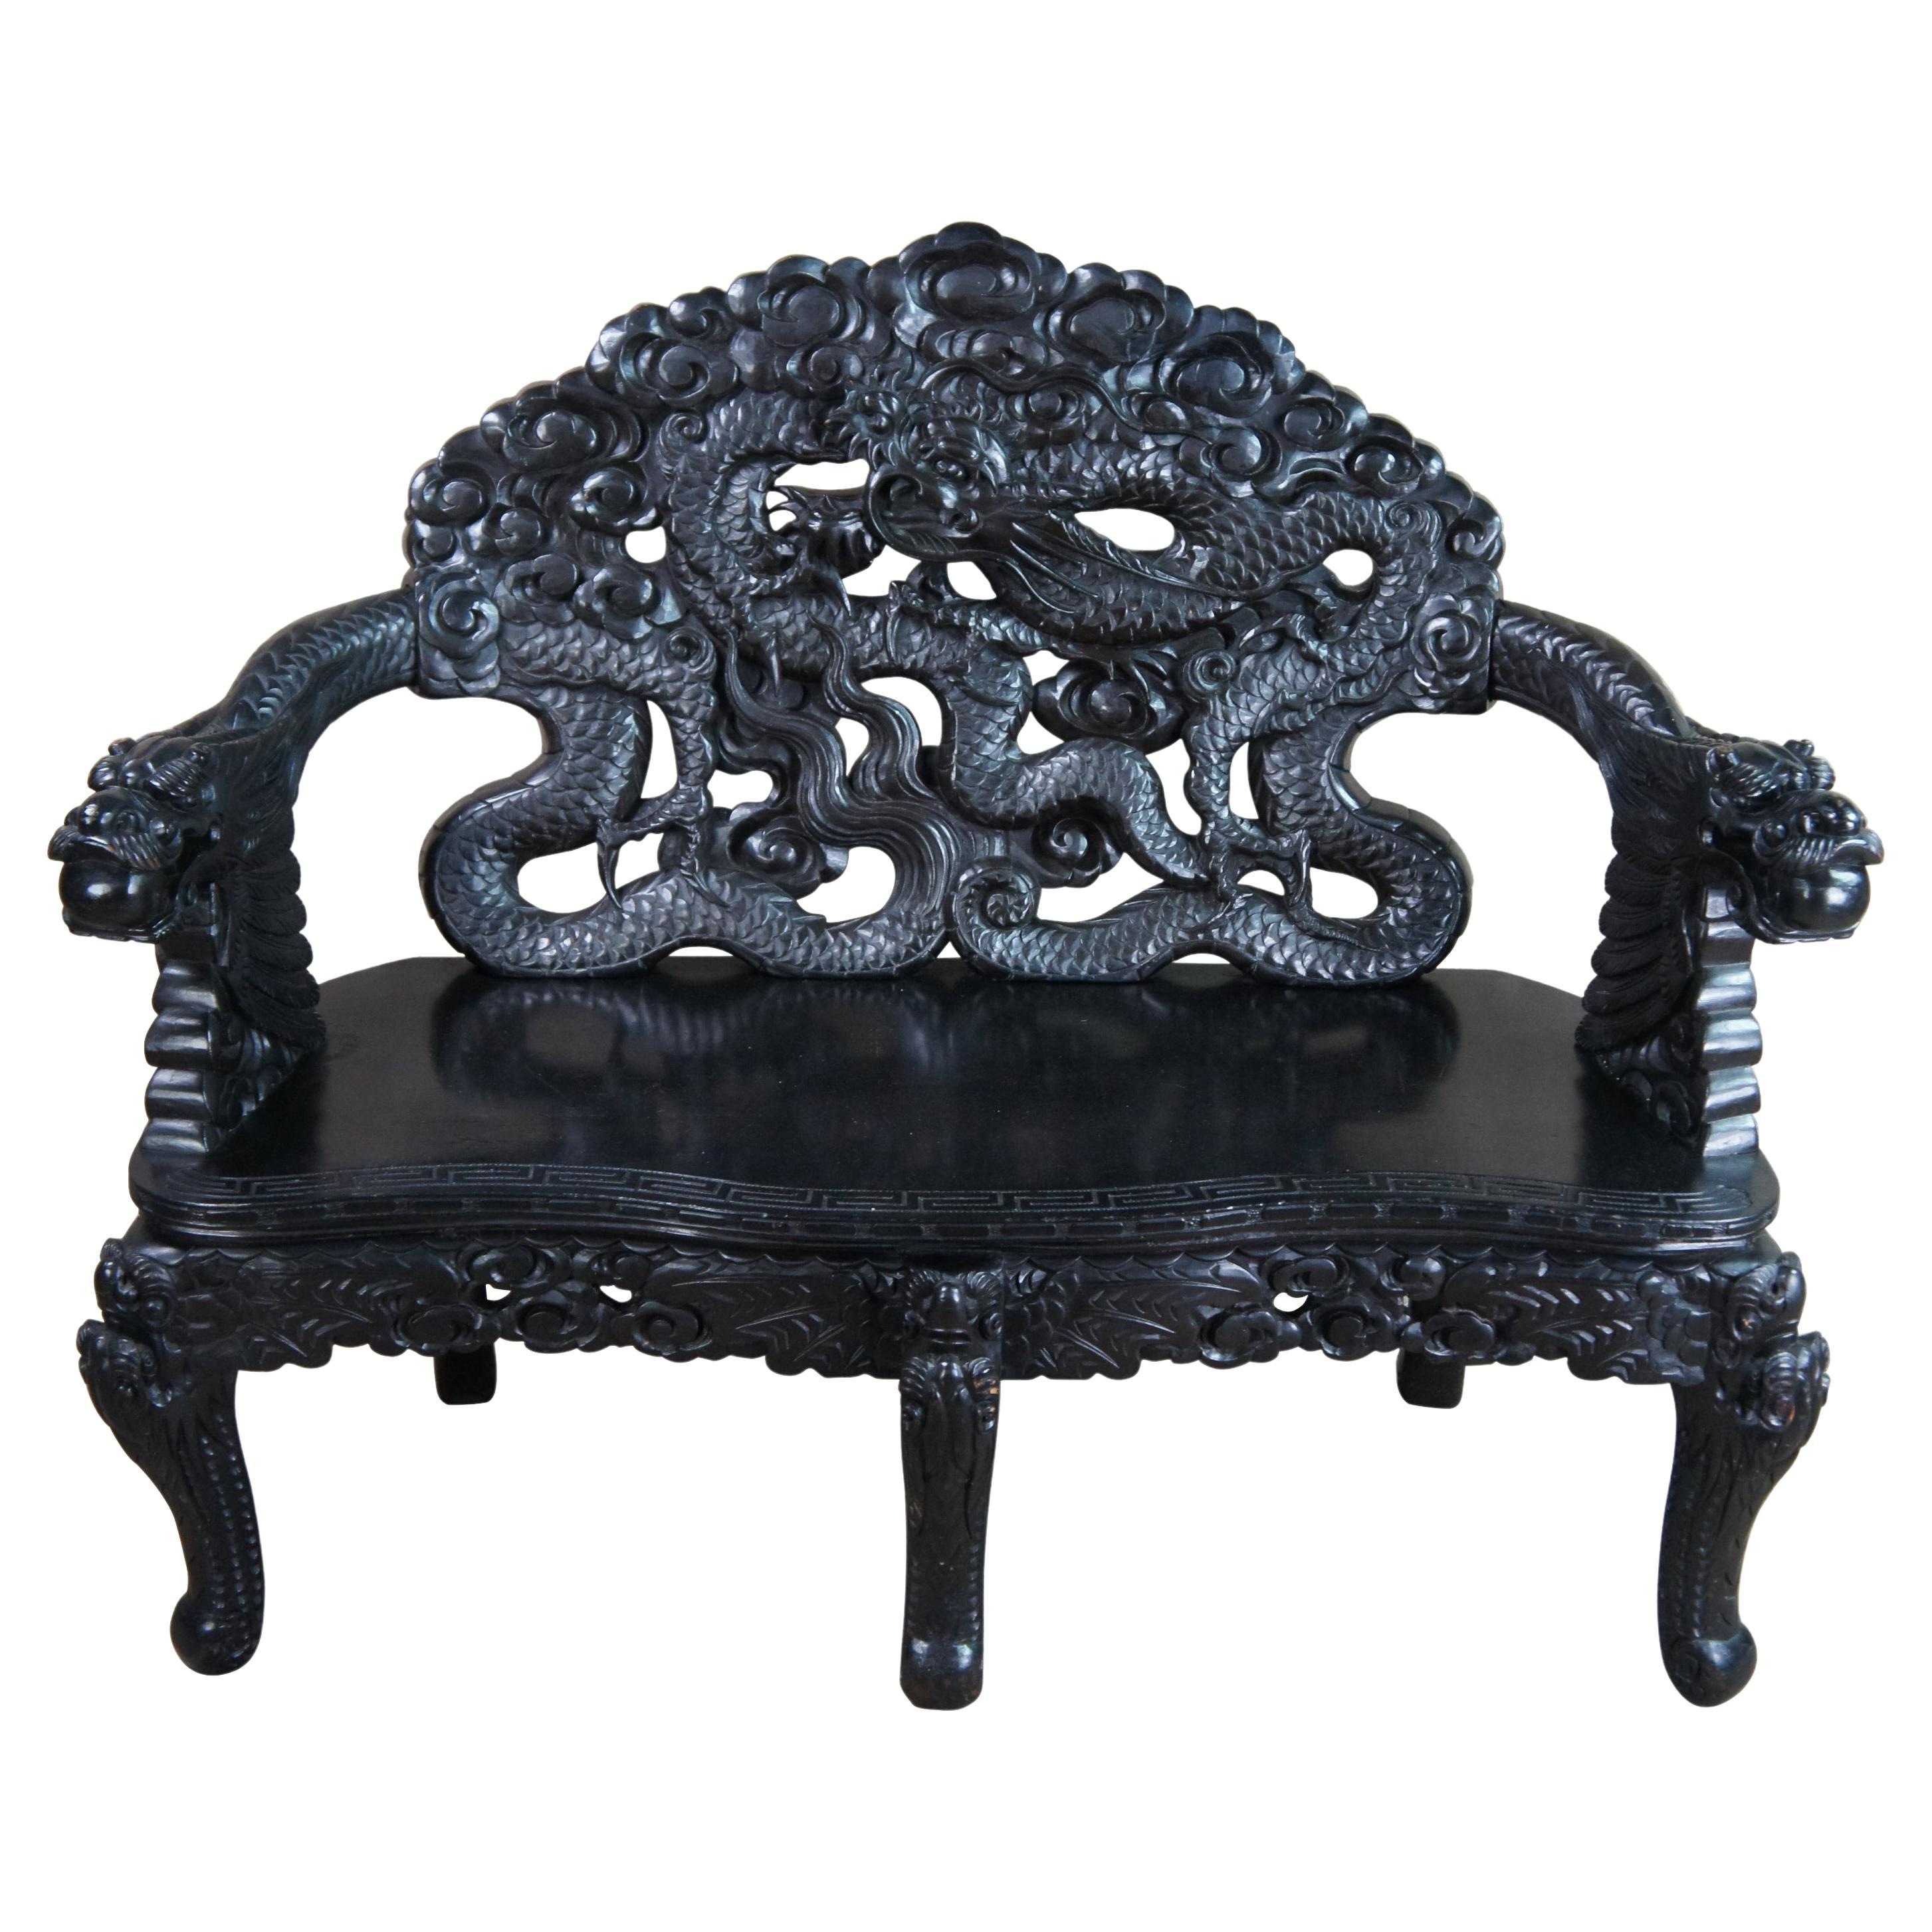 Antique Imperial Meiji Japanese Ebonized High Relief Carved Dragon Bench